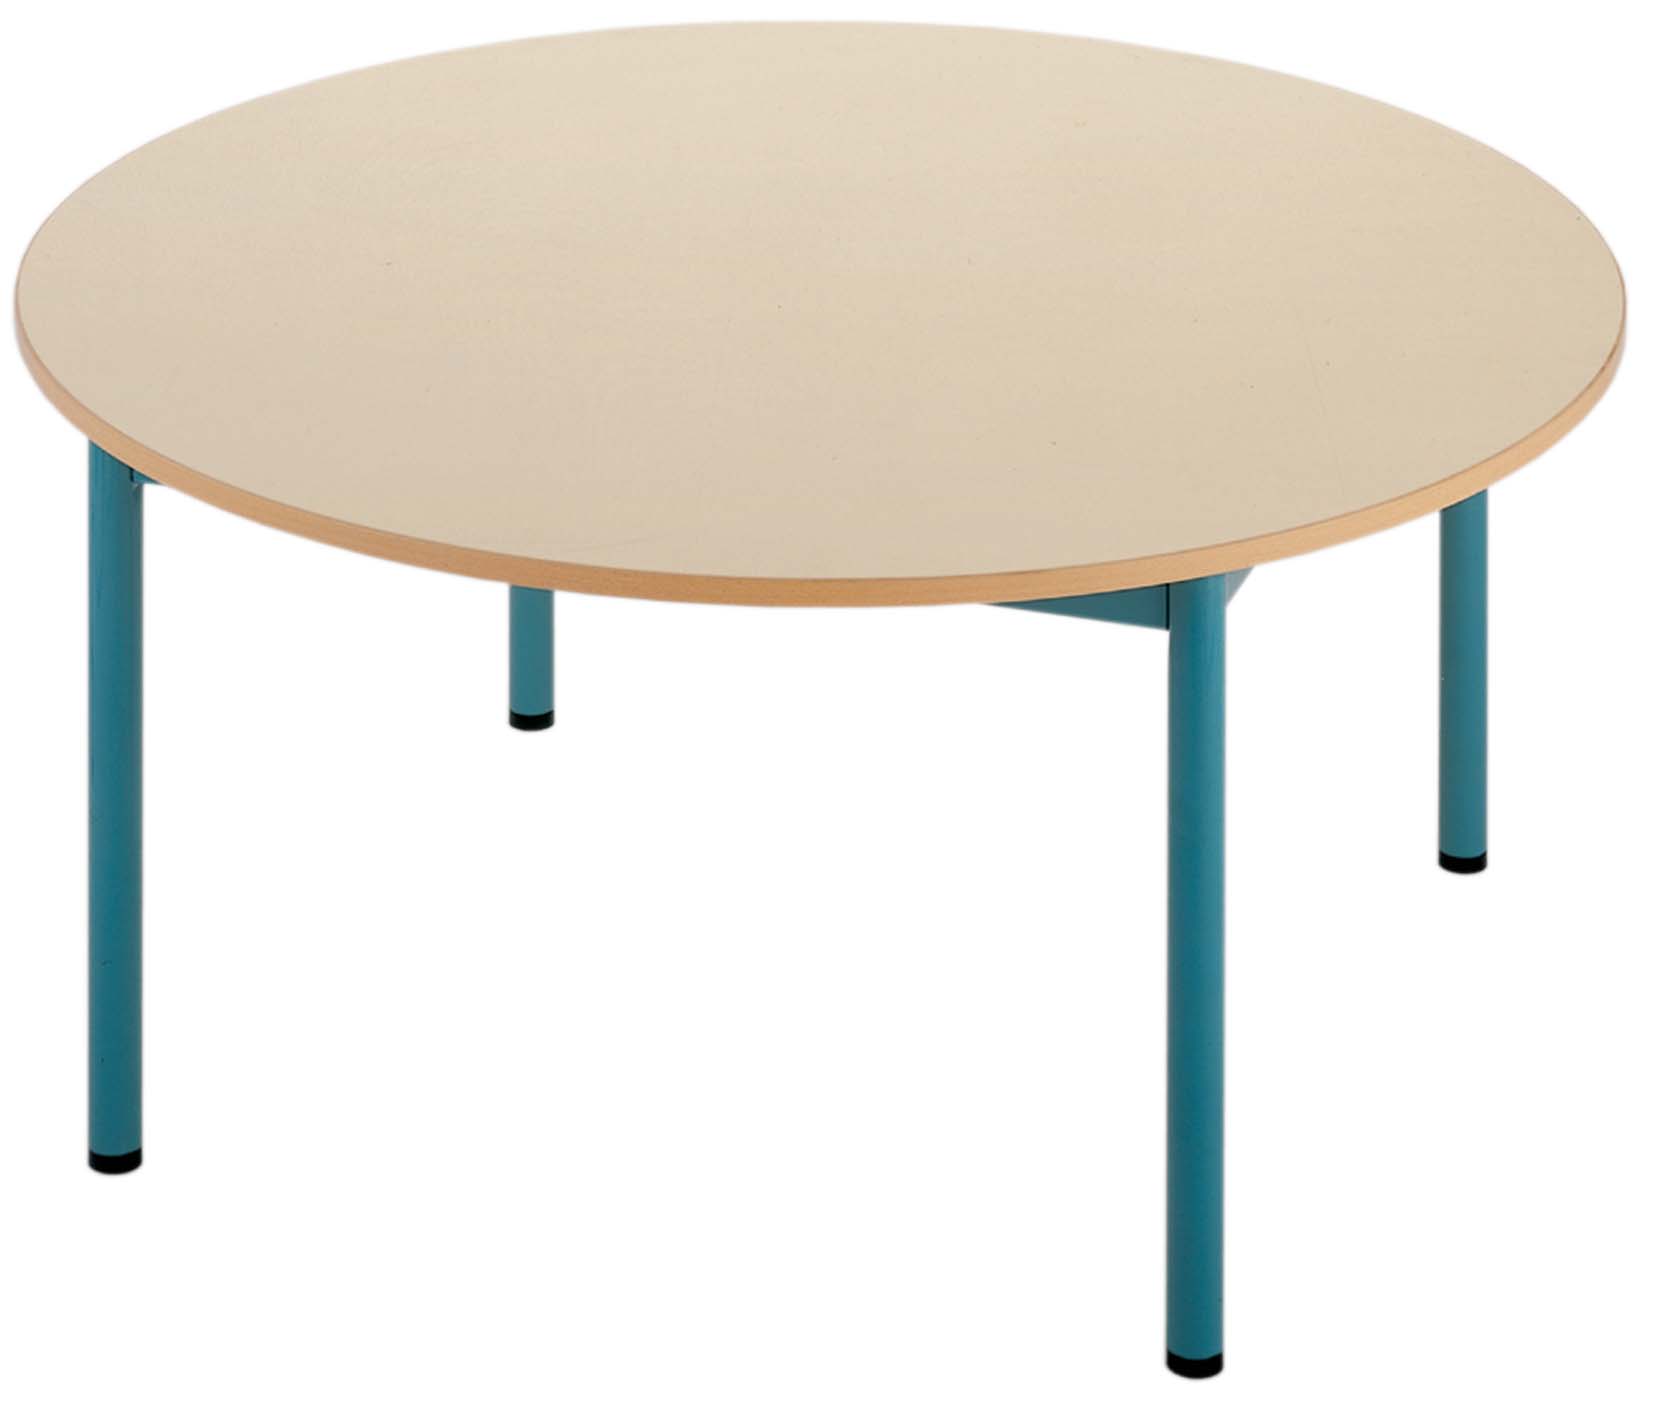 Table maternelle fixe Ronde